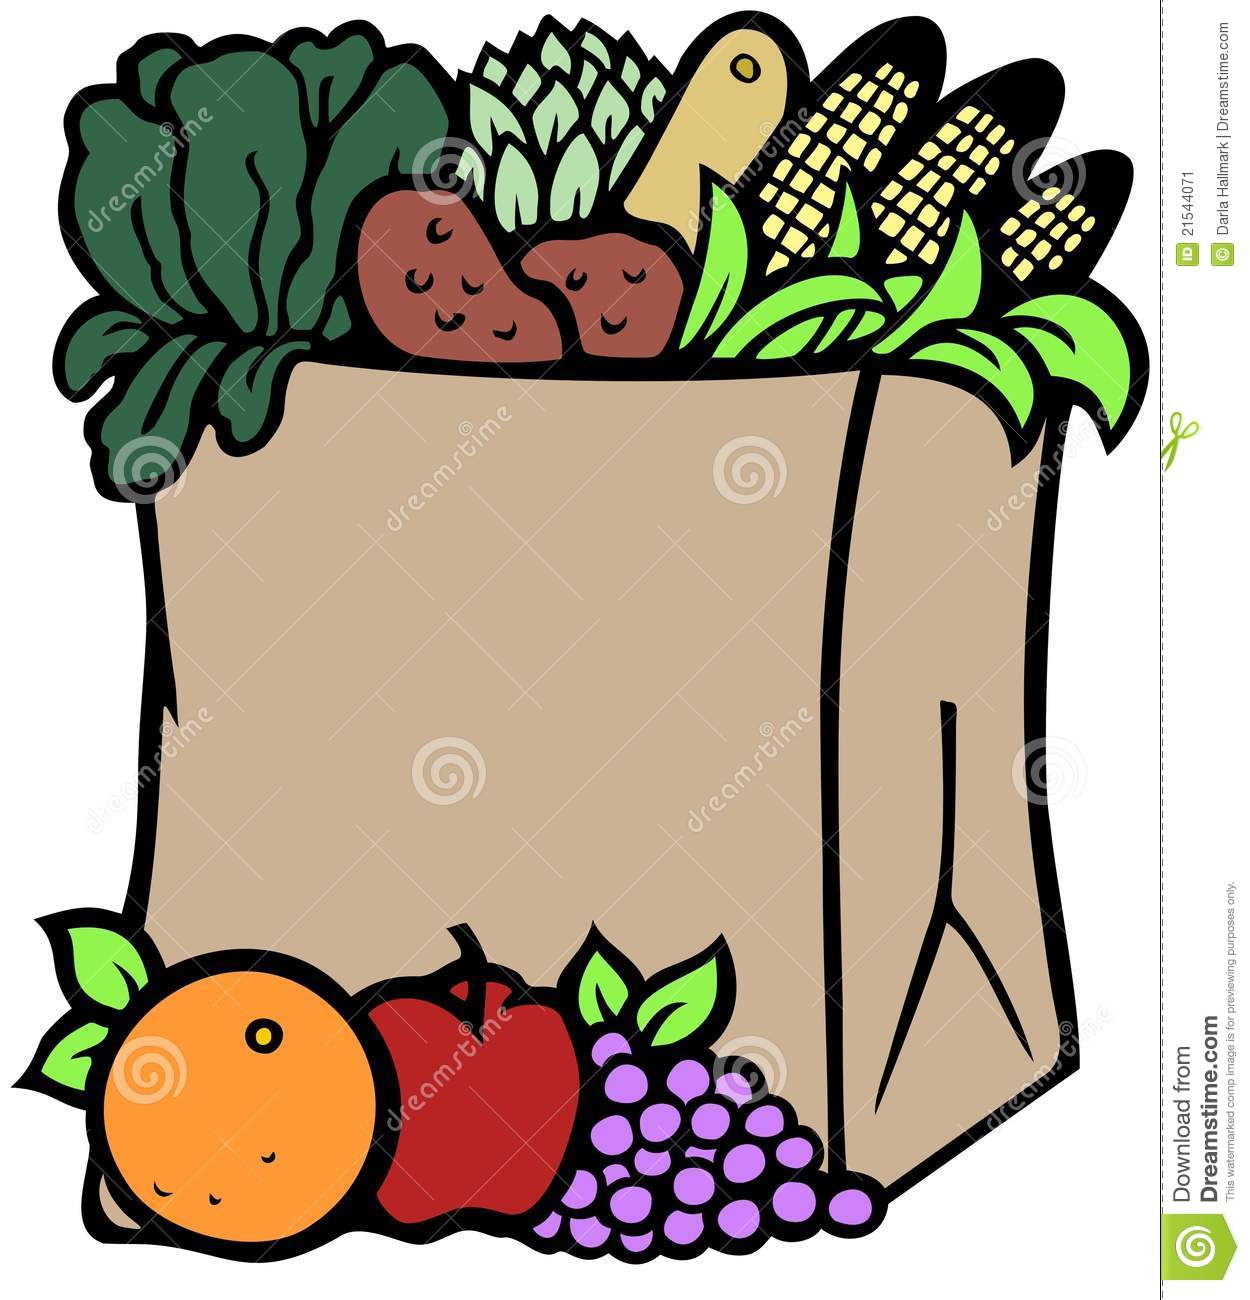 Fruits And Vegetables In A Recyclable Brown Paper Bag 